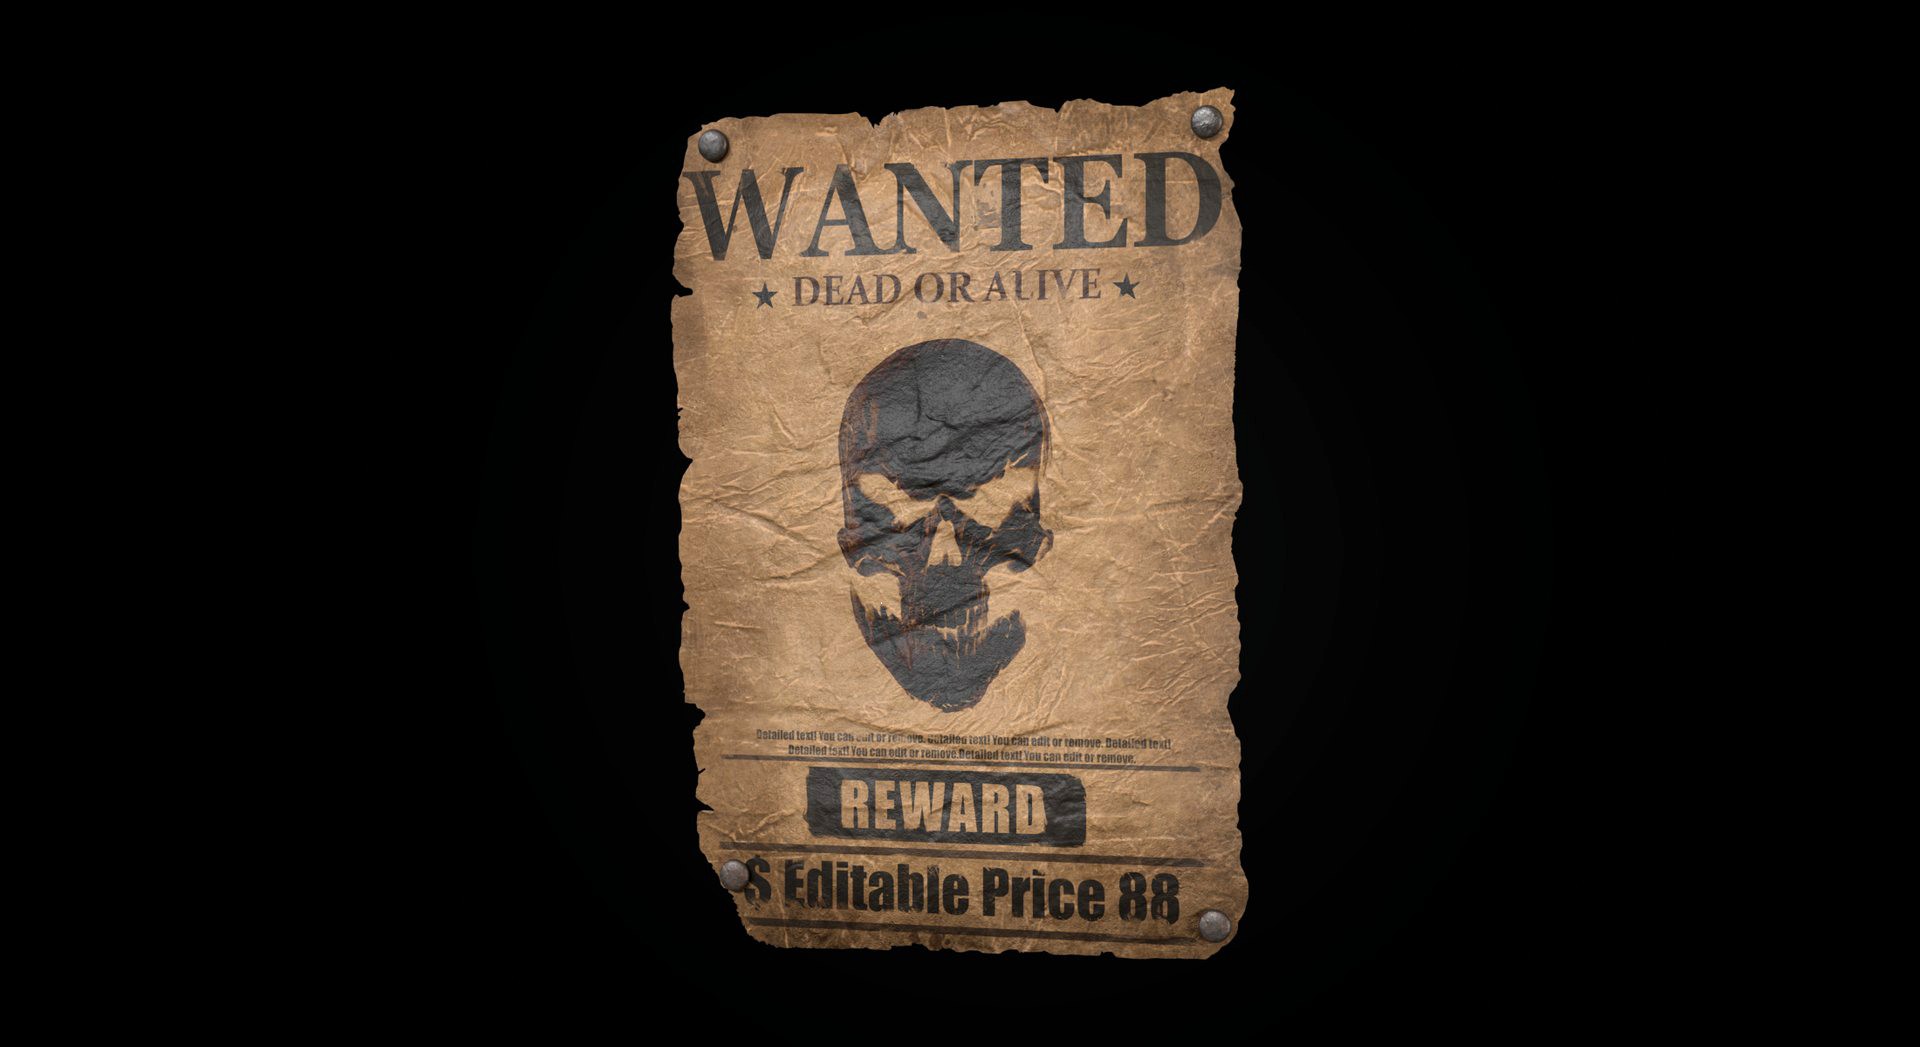 Wanted Poster v1 - (Editable)